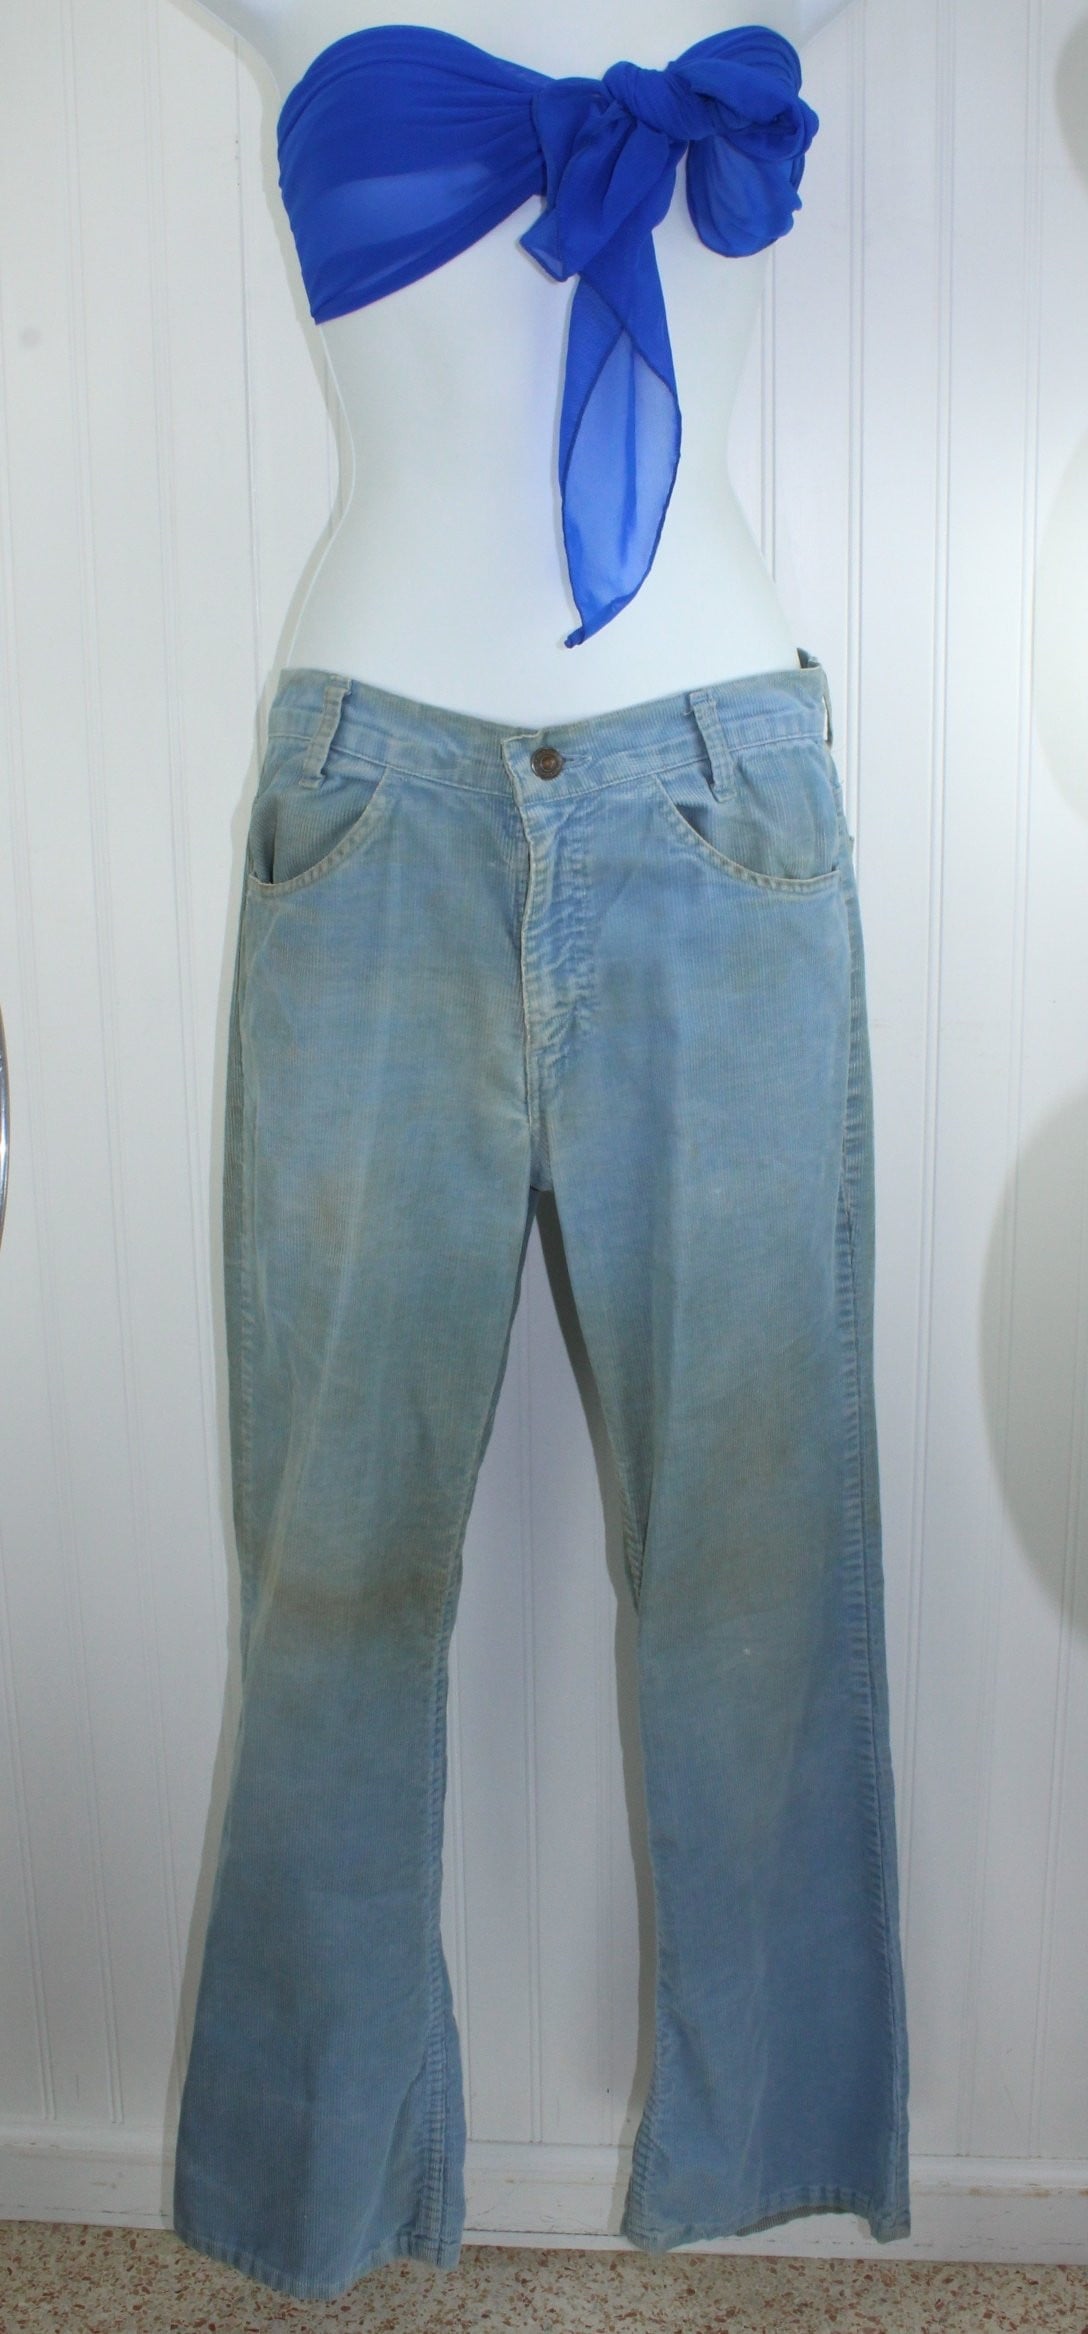 Vintage Levi's Skate Boarder Distressed Blue Cord Jeans 517 - Early 1990s - White Tab